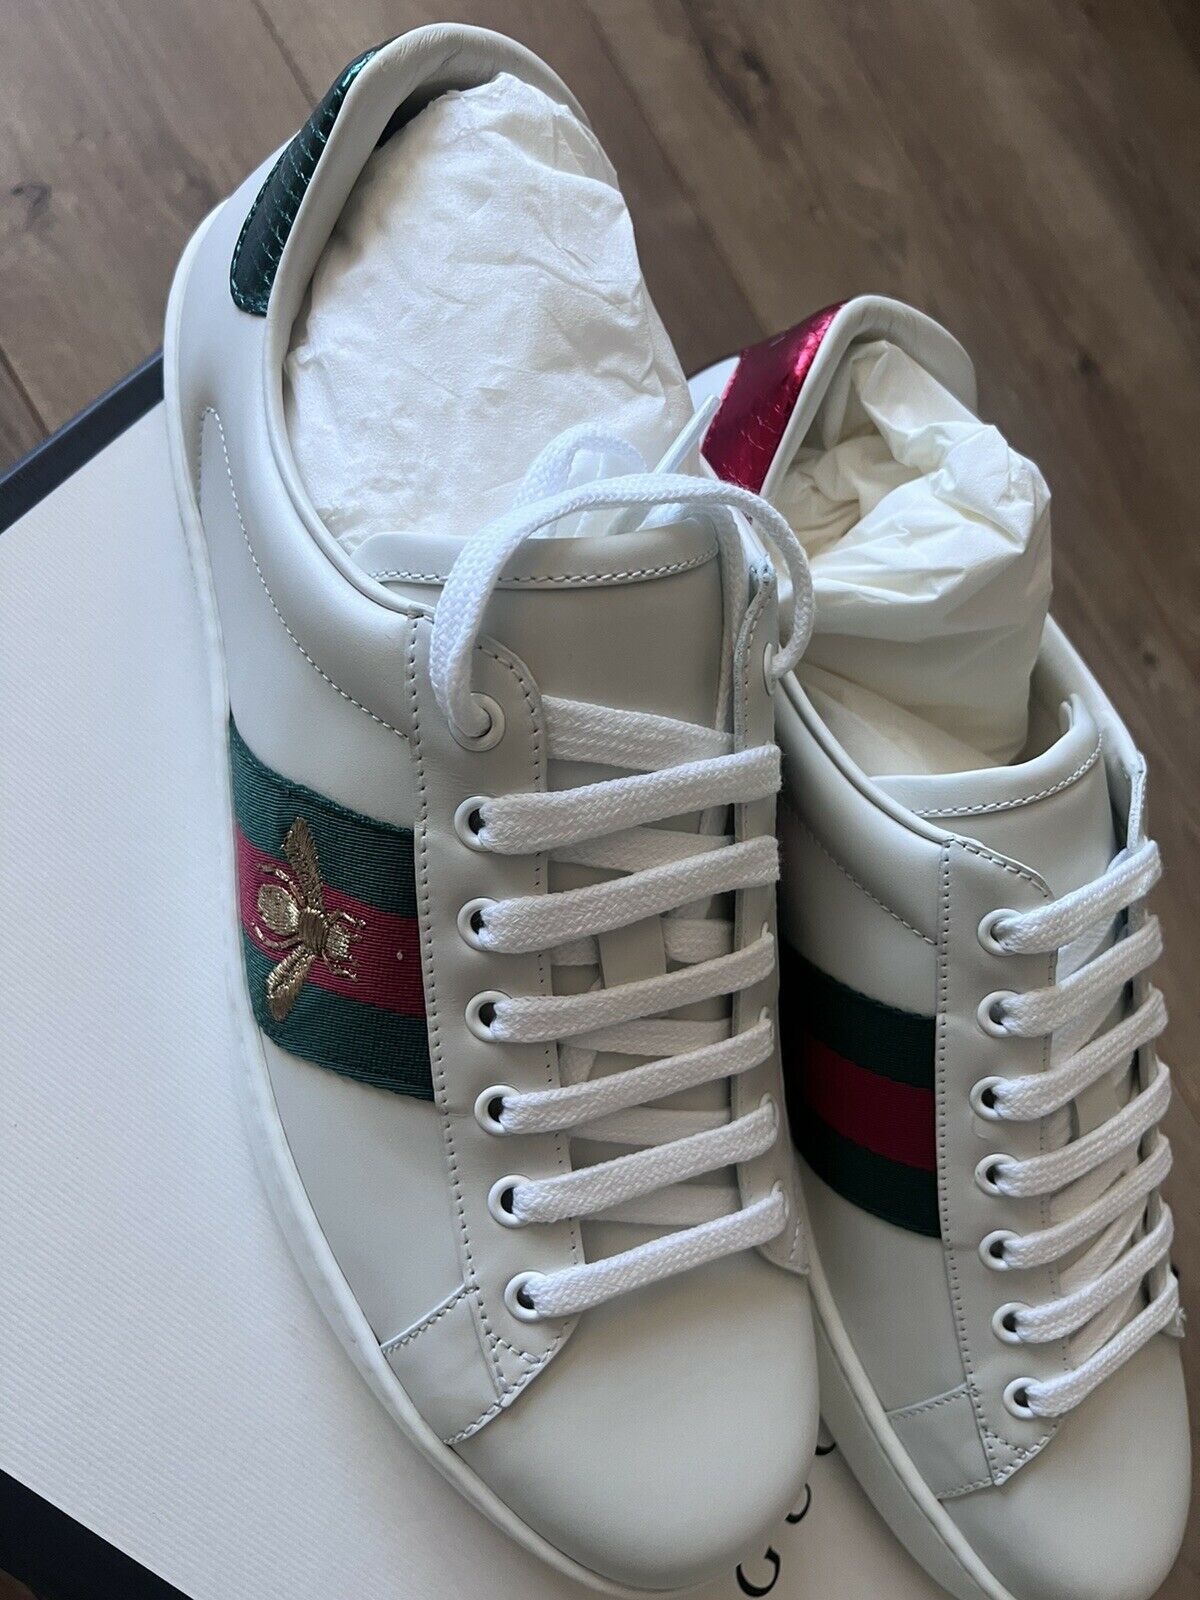 $650 Gucci Men's White New Ace Bee Lace-up Trainers Sneakers Shoes UK 10 US 11